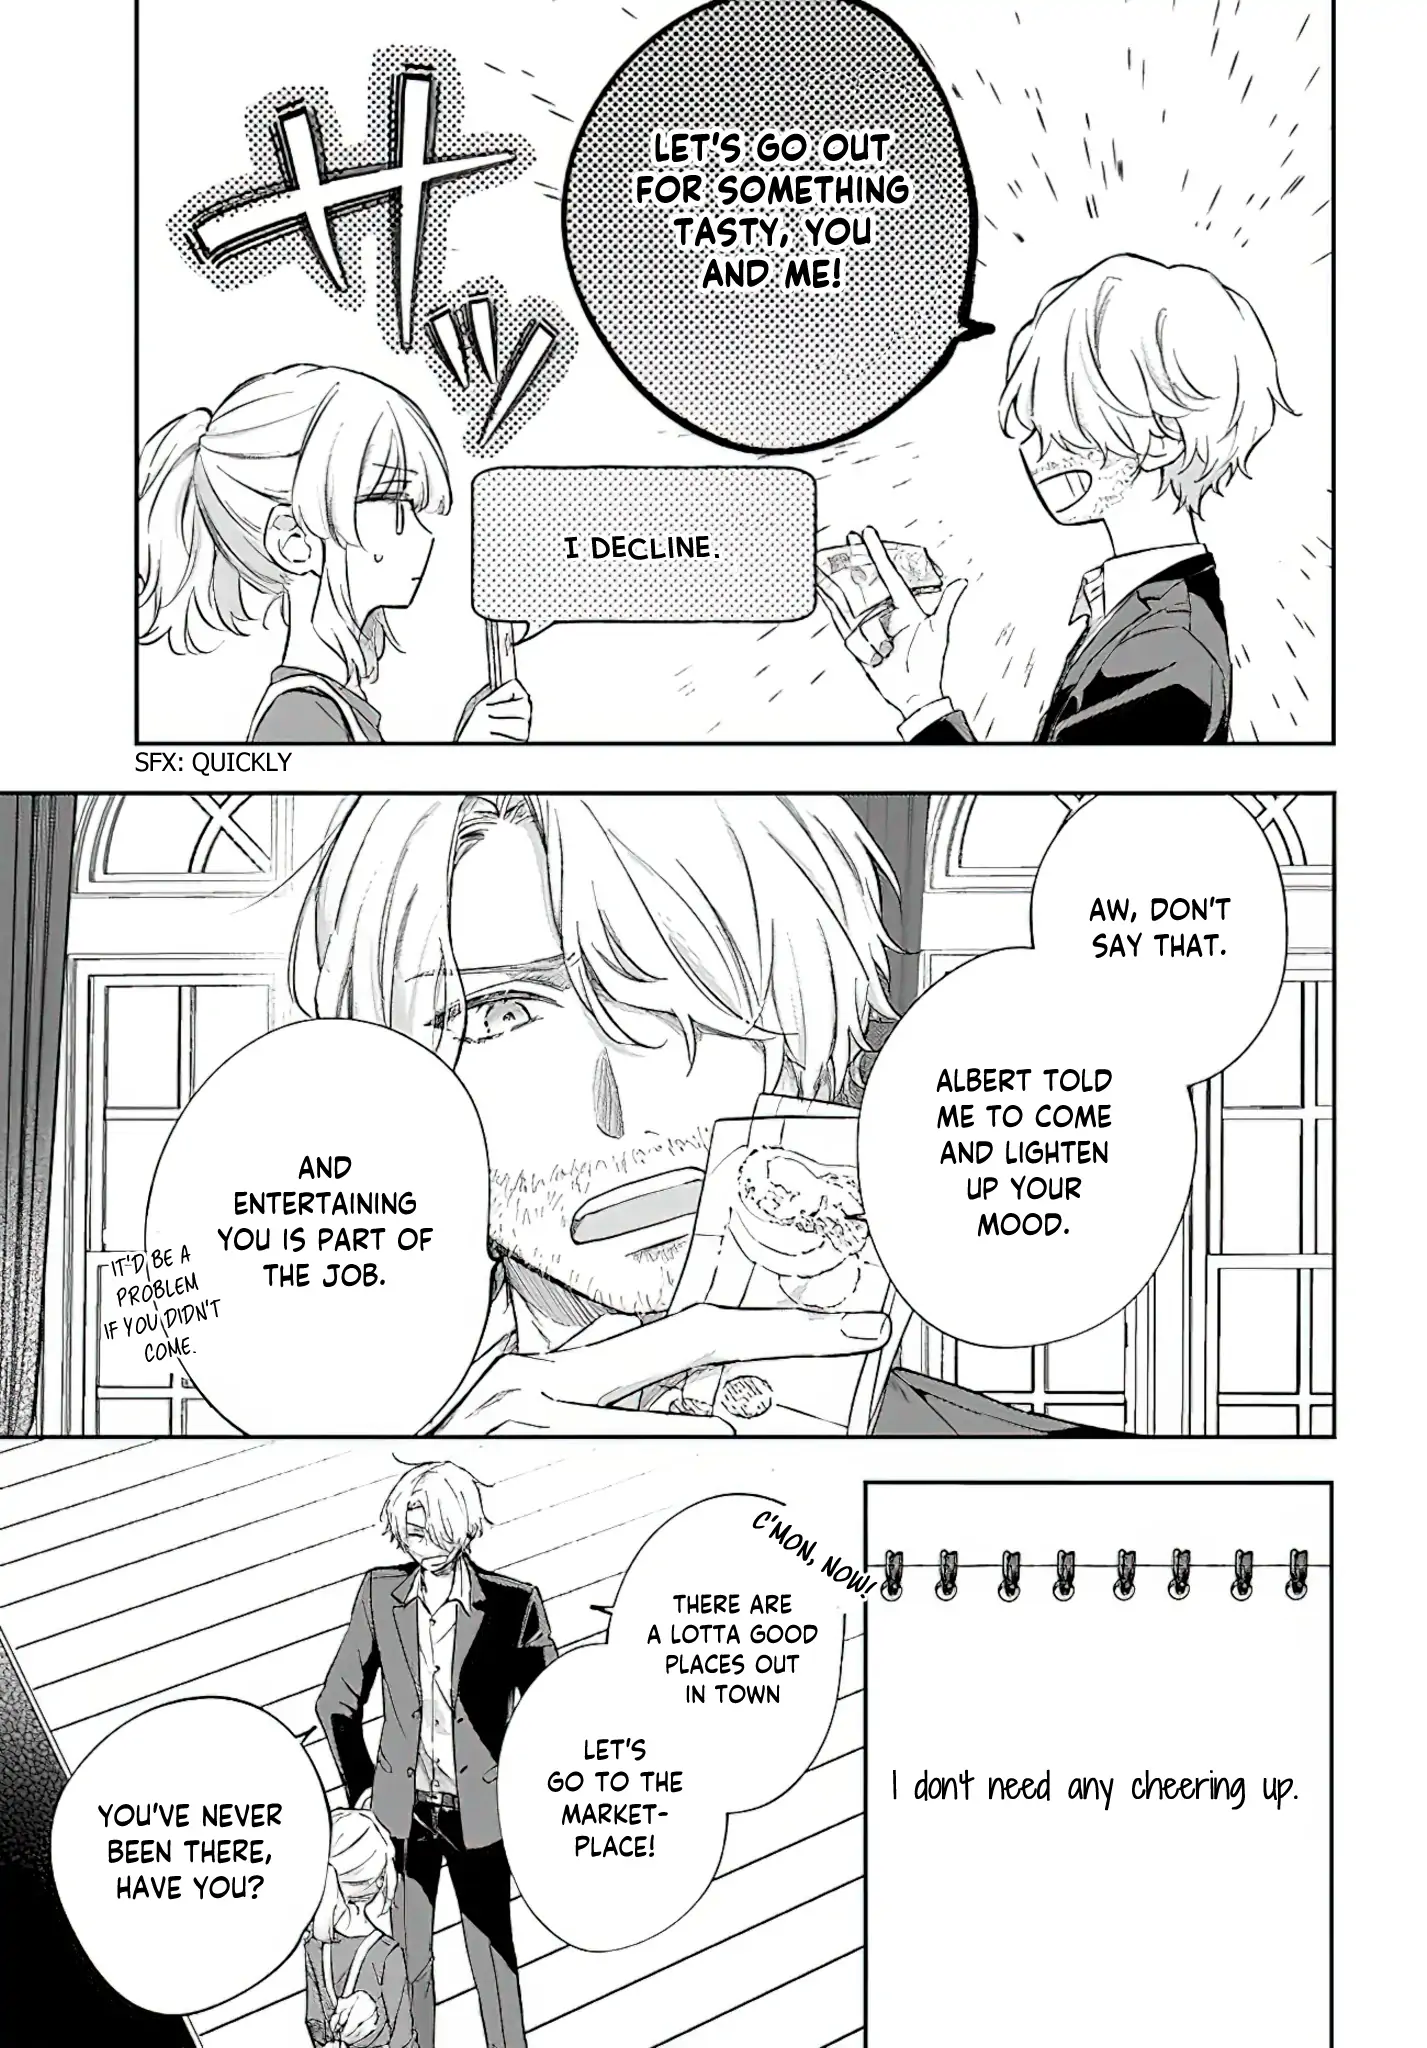 Sweet Allegiance to the Lorenzi Family Tonight - Chapter 2.2 The Girl with  the Golden Eyes - Coffee Manga